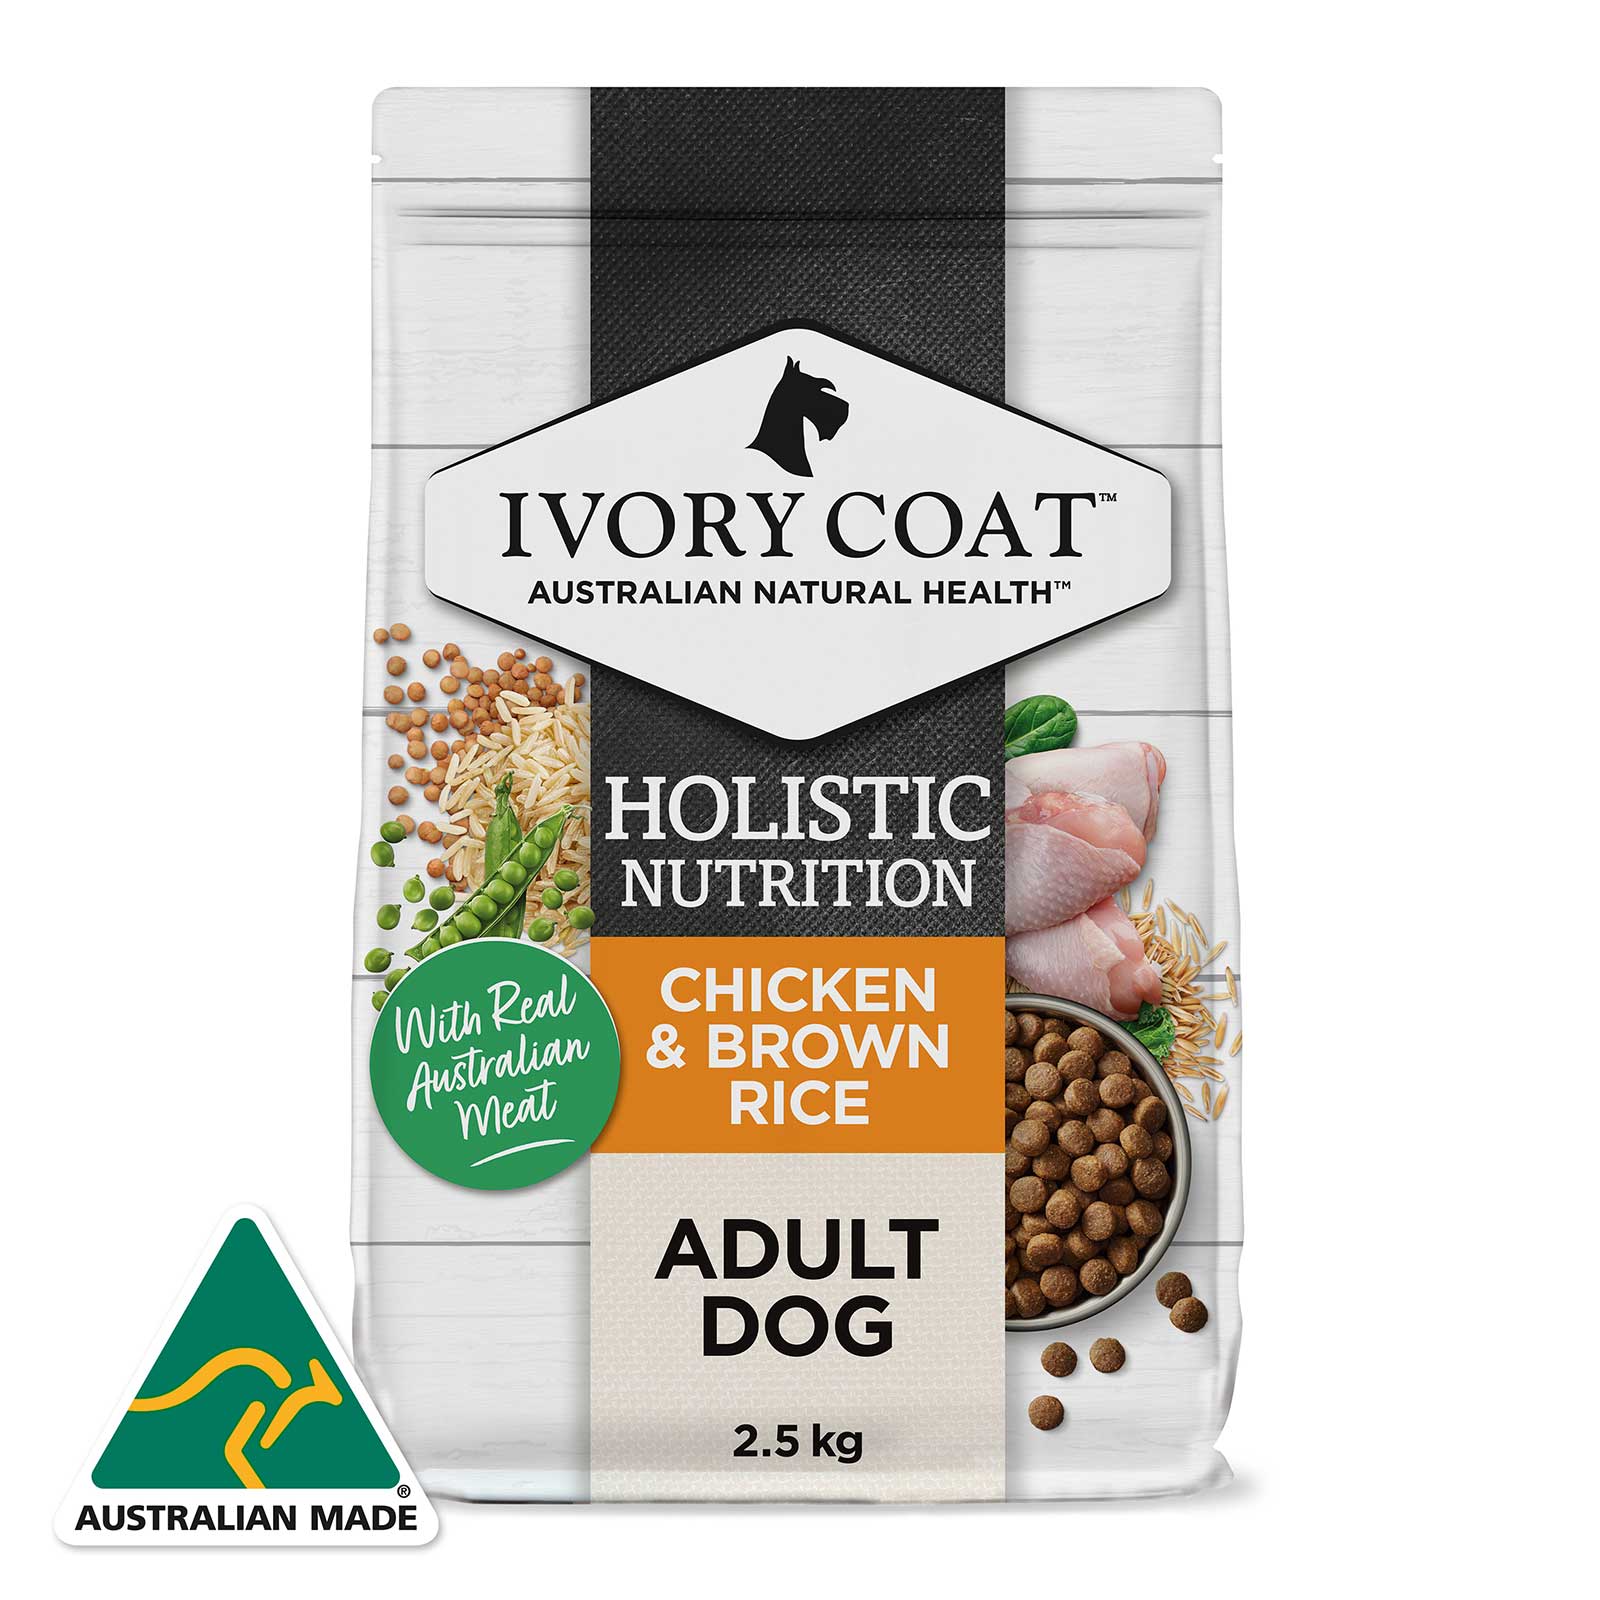 Ivory Coat Dog Food Adult Chicken & Brown Rice